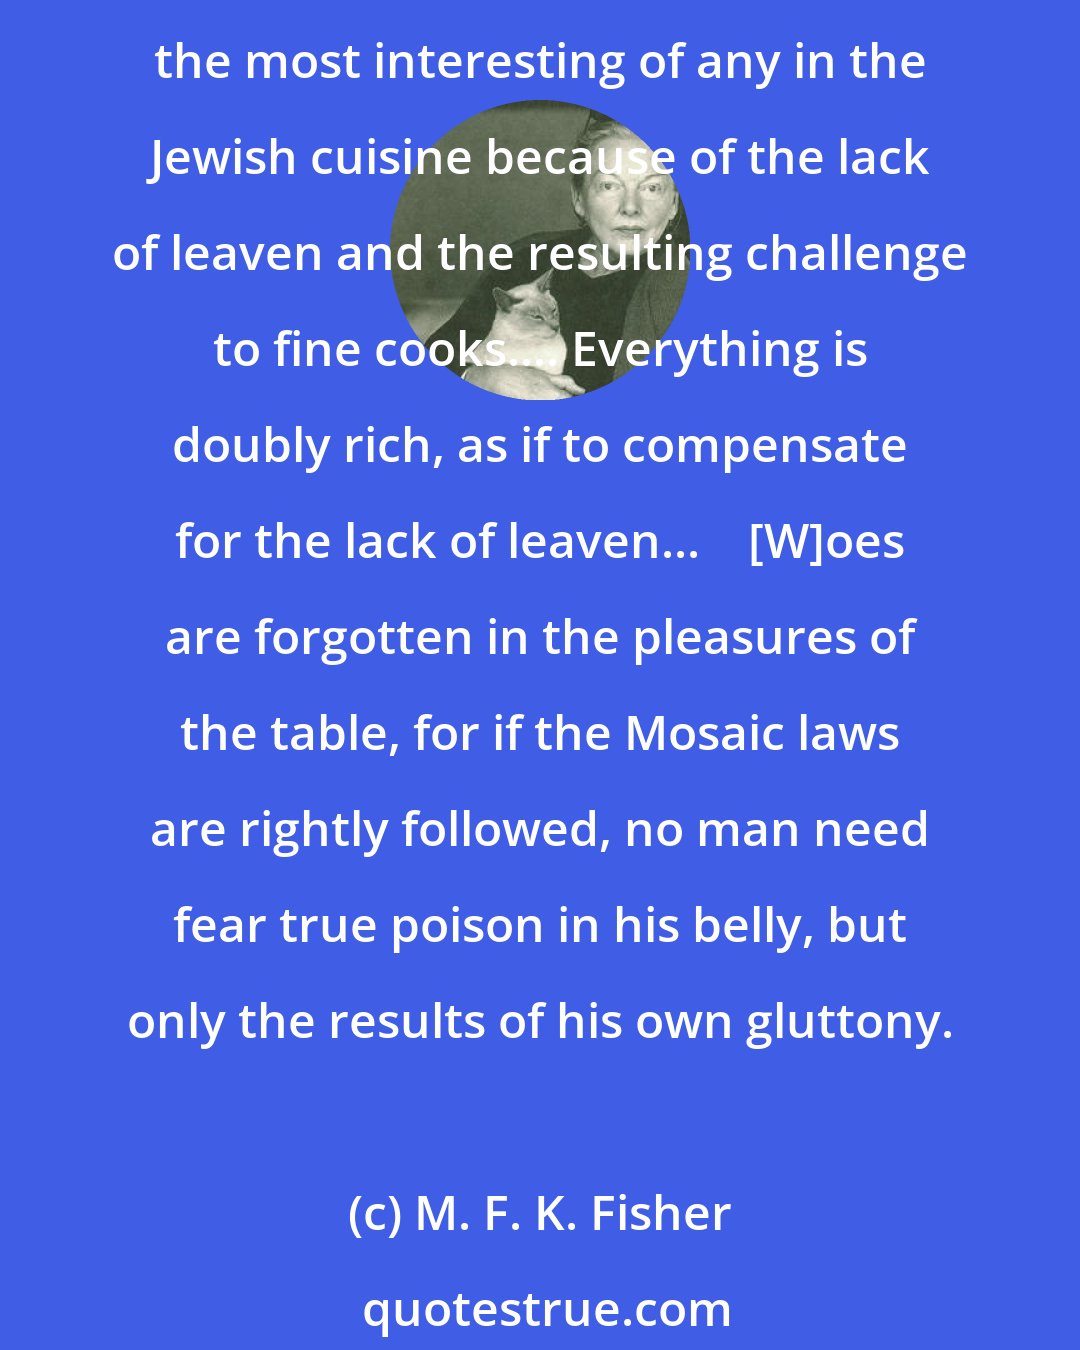 M. F. K. Fisher: As for the house, it is scrubbed to the tiniest mousehole before Passover, to avoid such dangers as even a forgotten cake crumb might cause.    Passover dishes are probably the most interesting of any in the Jewish cuisine because of the lack of leaven and the resulting challenge to fine cooks.... Everything is doubly rich, as if to compensate for the lack of leaven...    [W]oes are forgotten in the pleasures of the table, for if the Mosaic laws are rightly followed, no man need fear true poison in his belly, but only the results of his own gluttony.